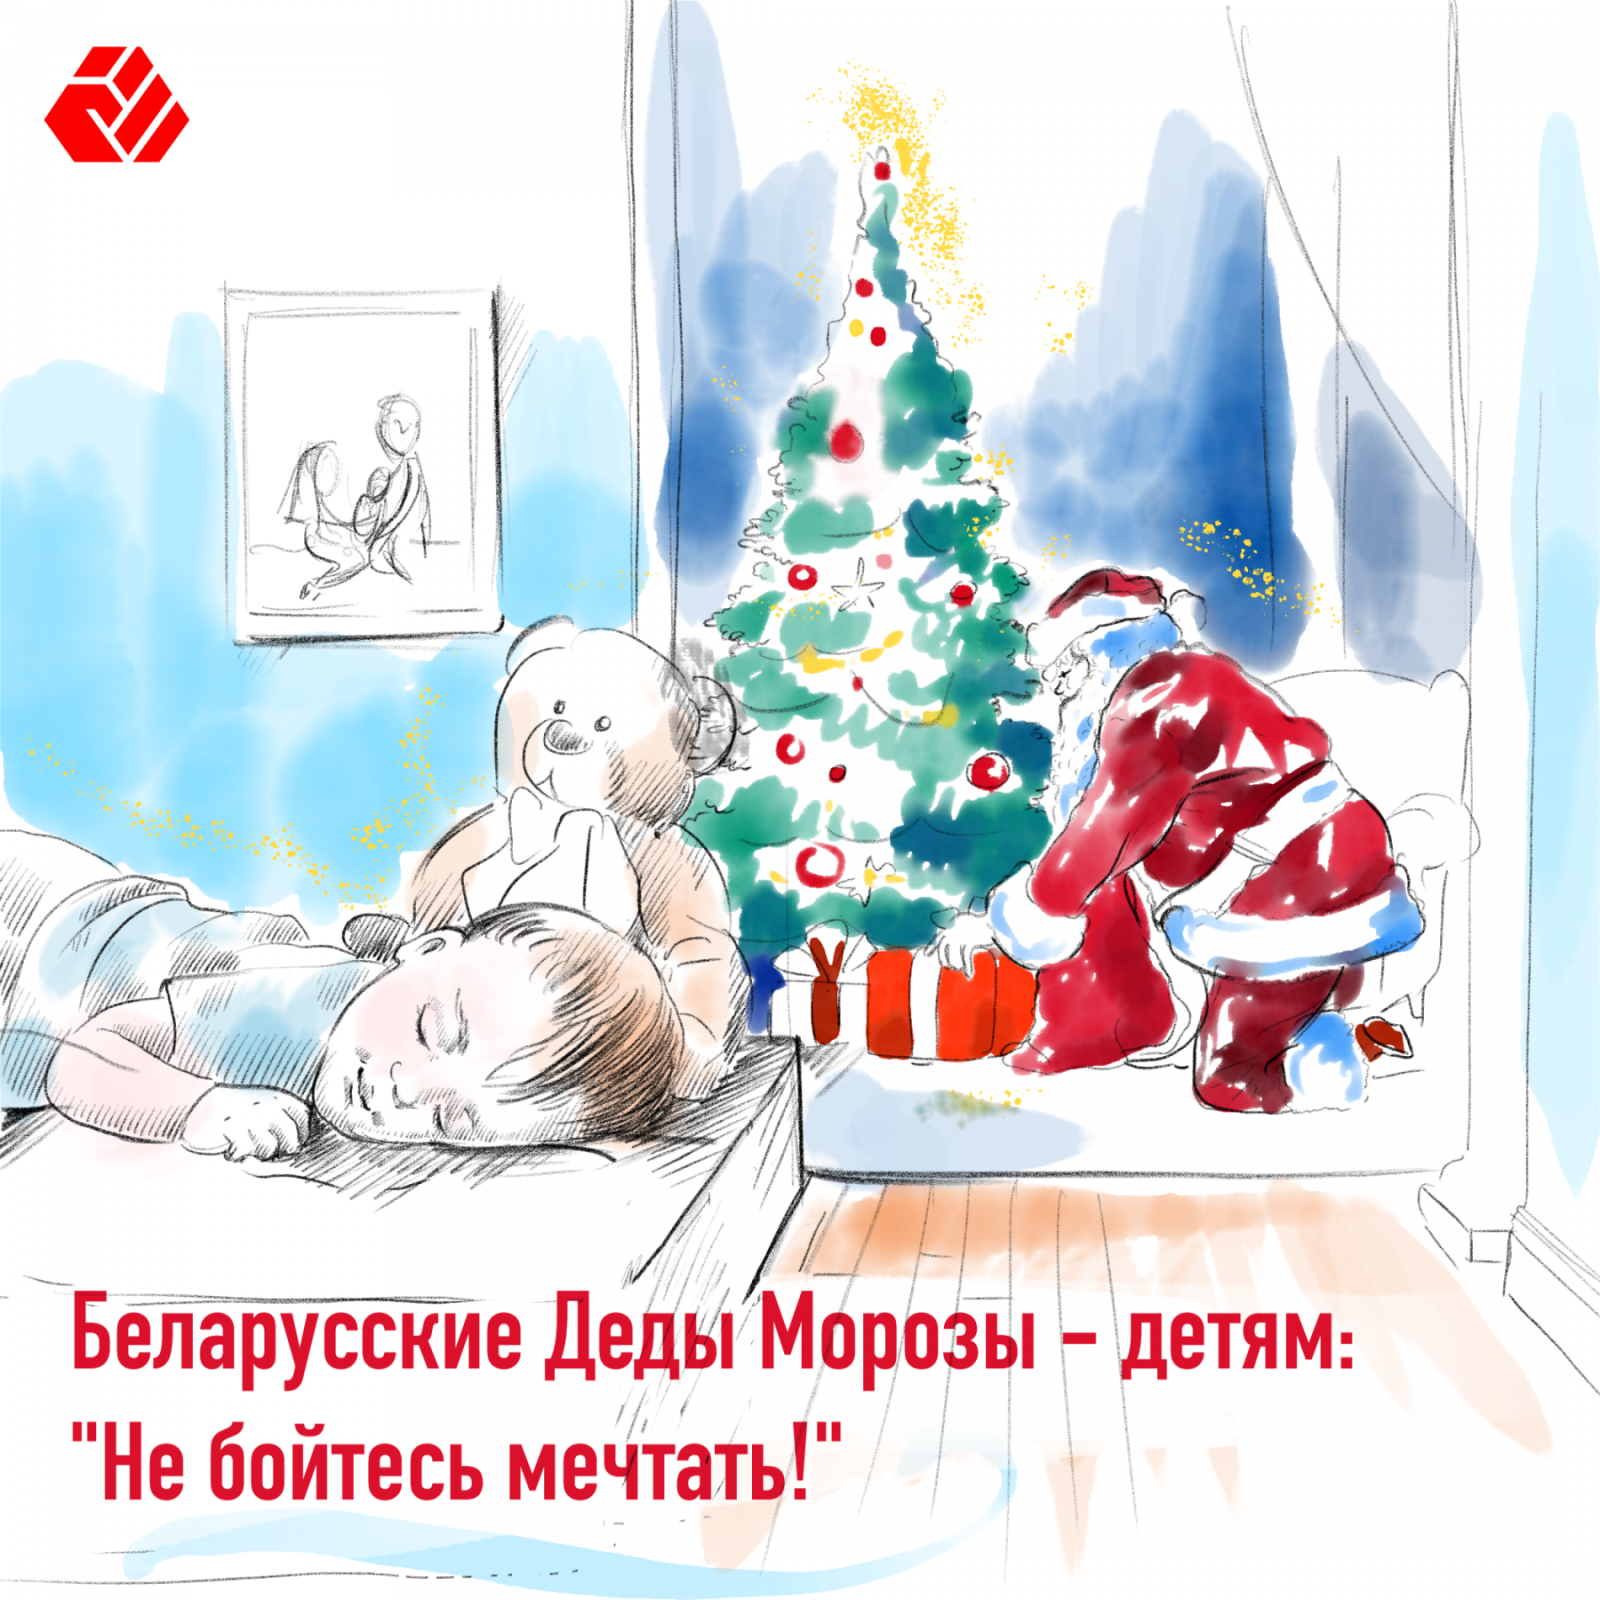 Belarusian Santa Clauses to children: "Do not be afraid to dream!"